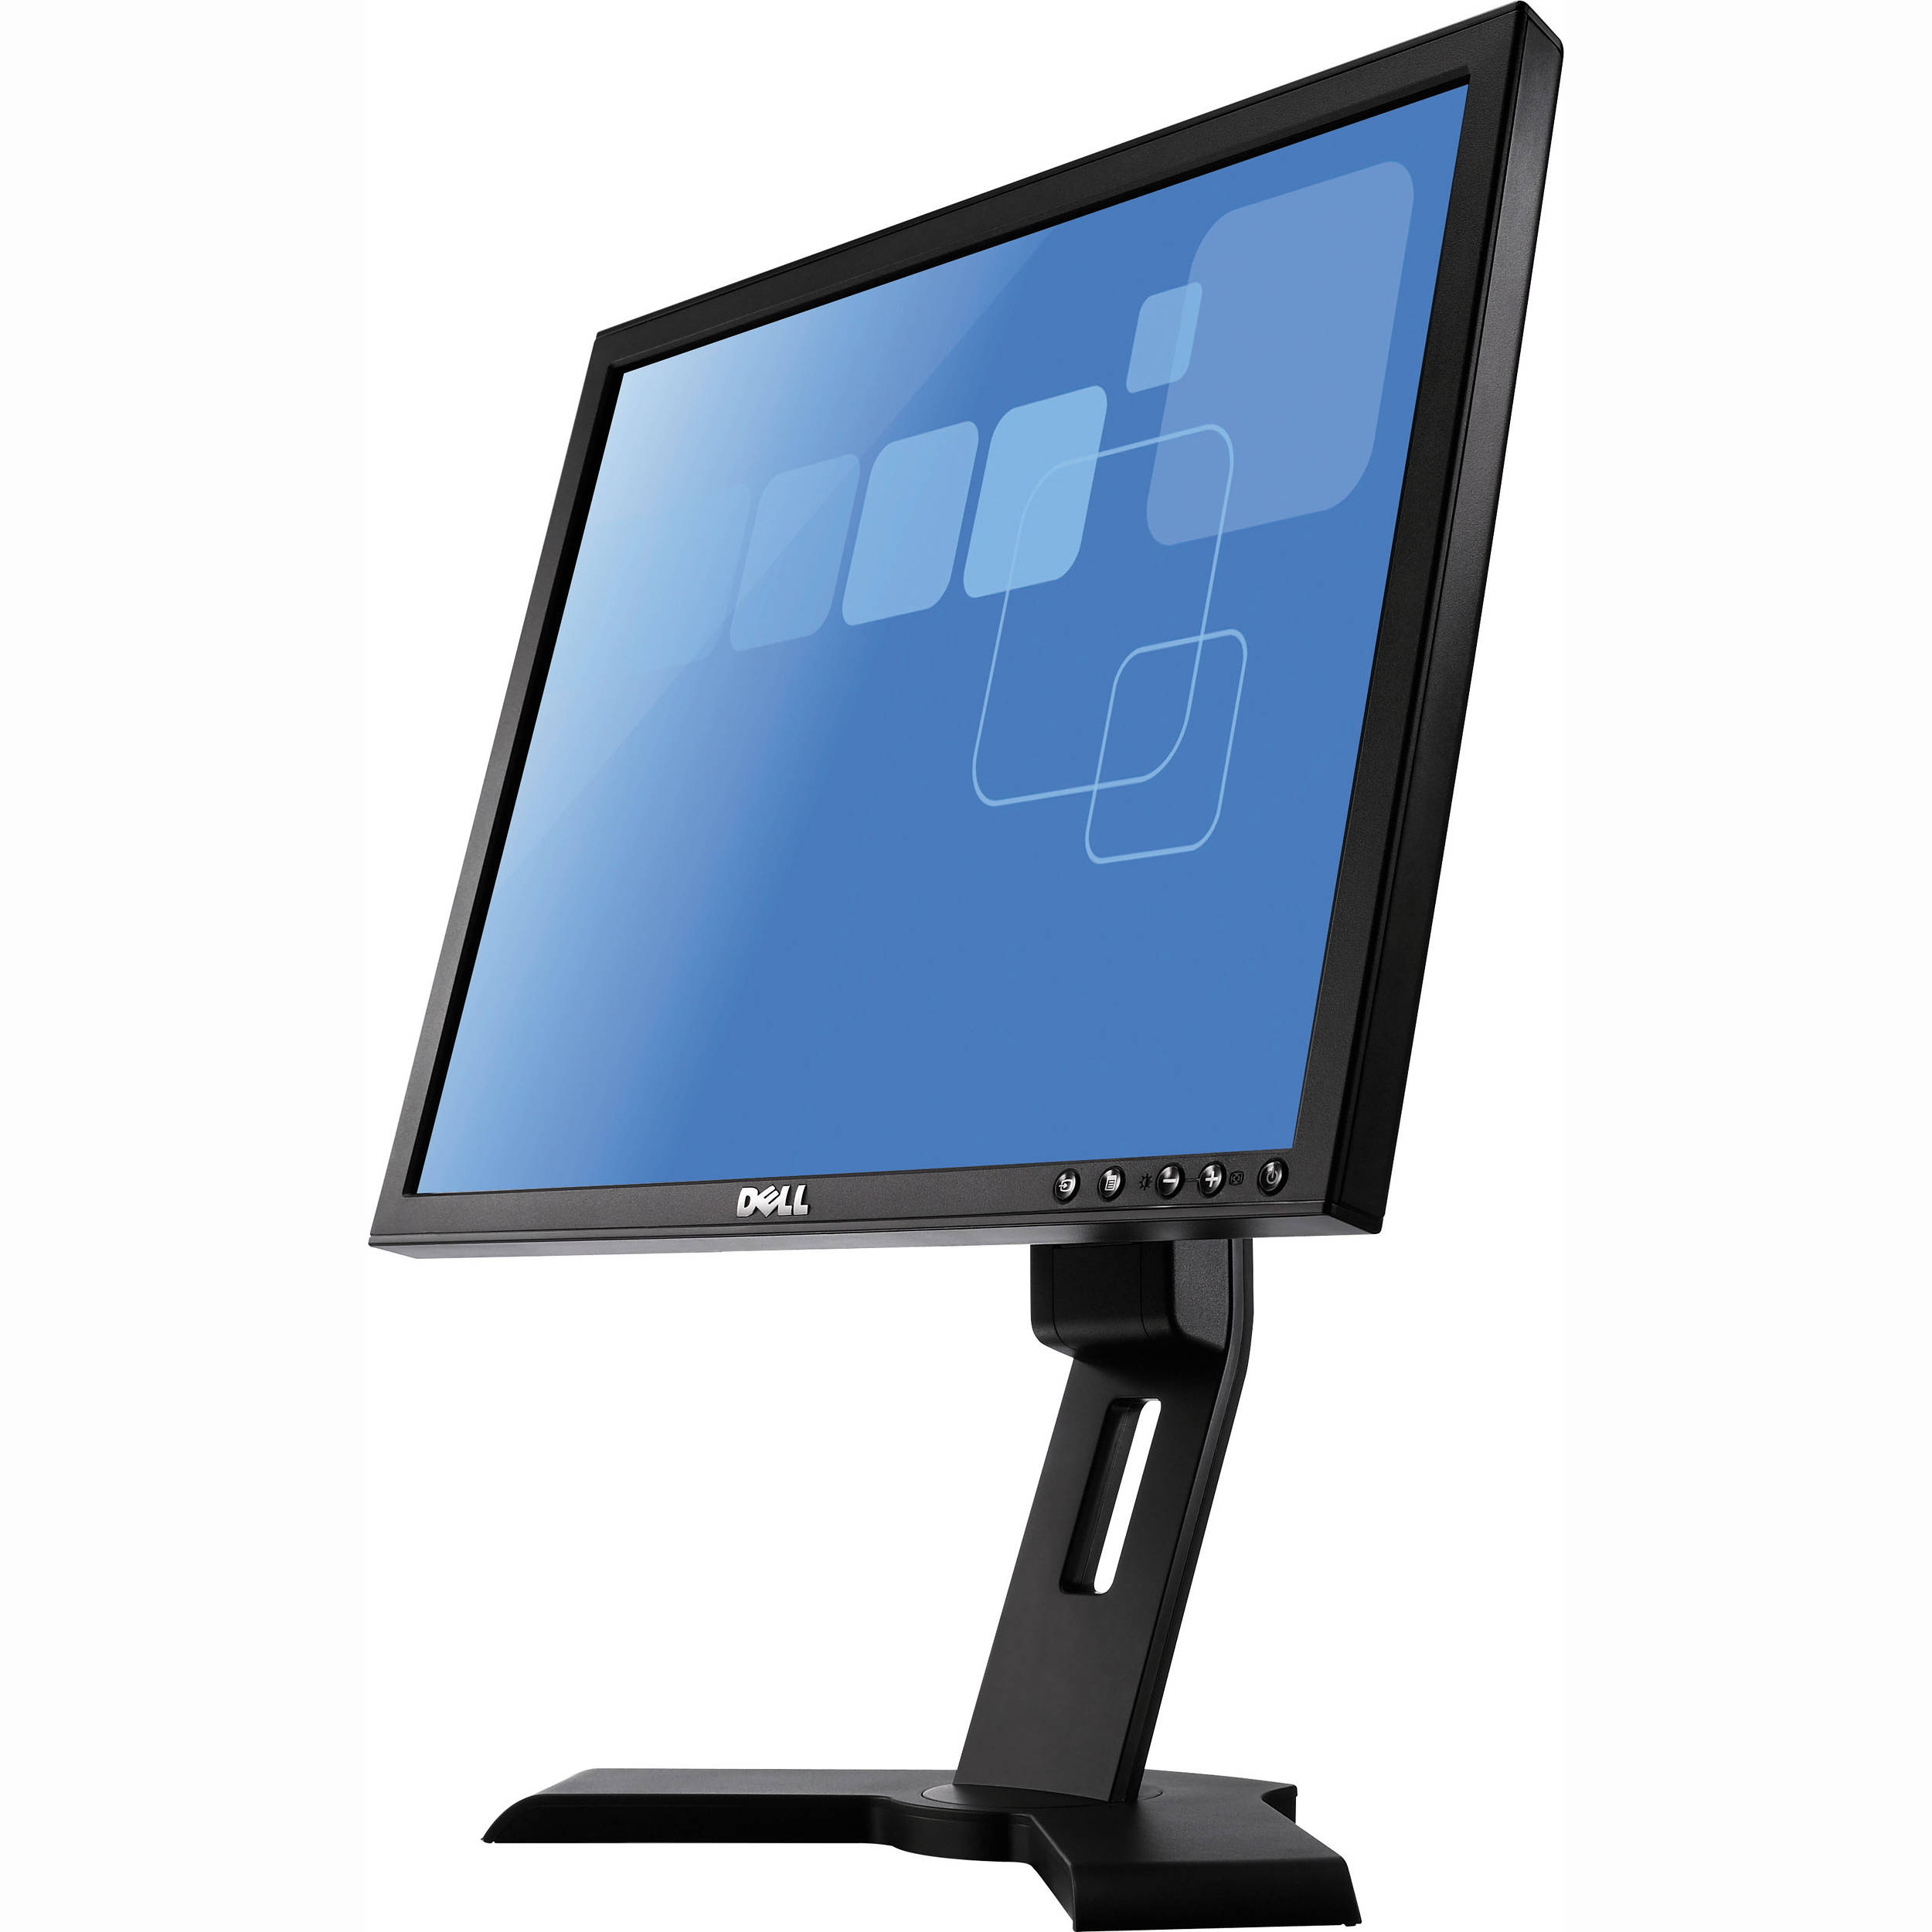 COL - Dell 19" LCD Monitor - Used